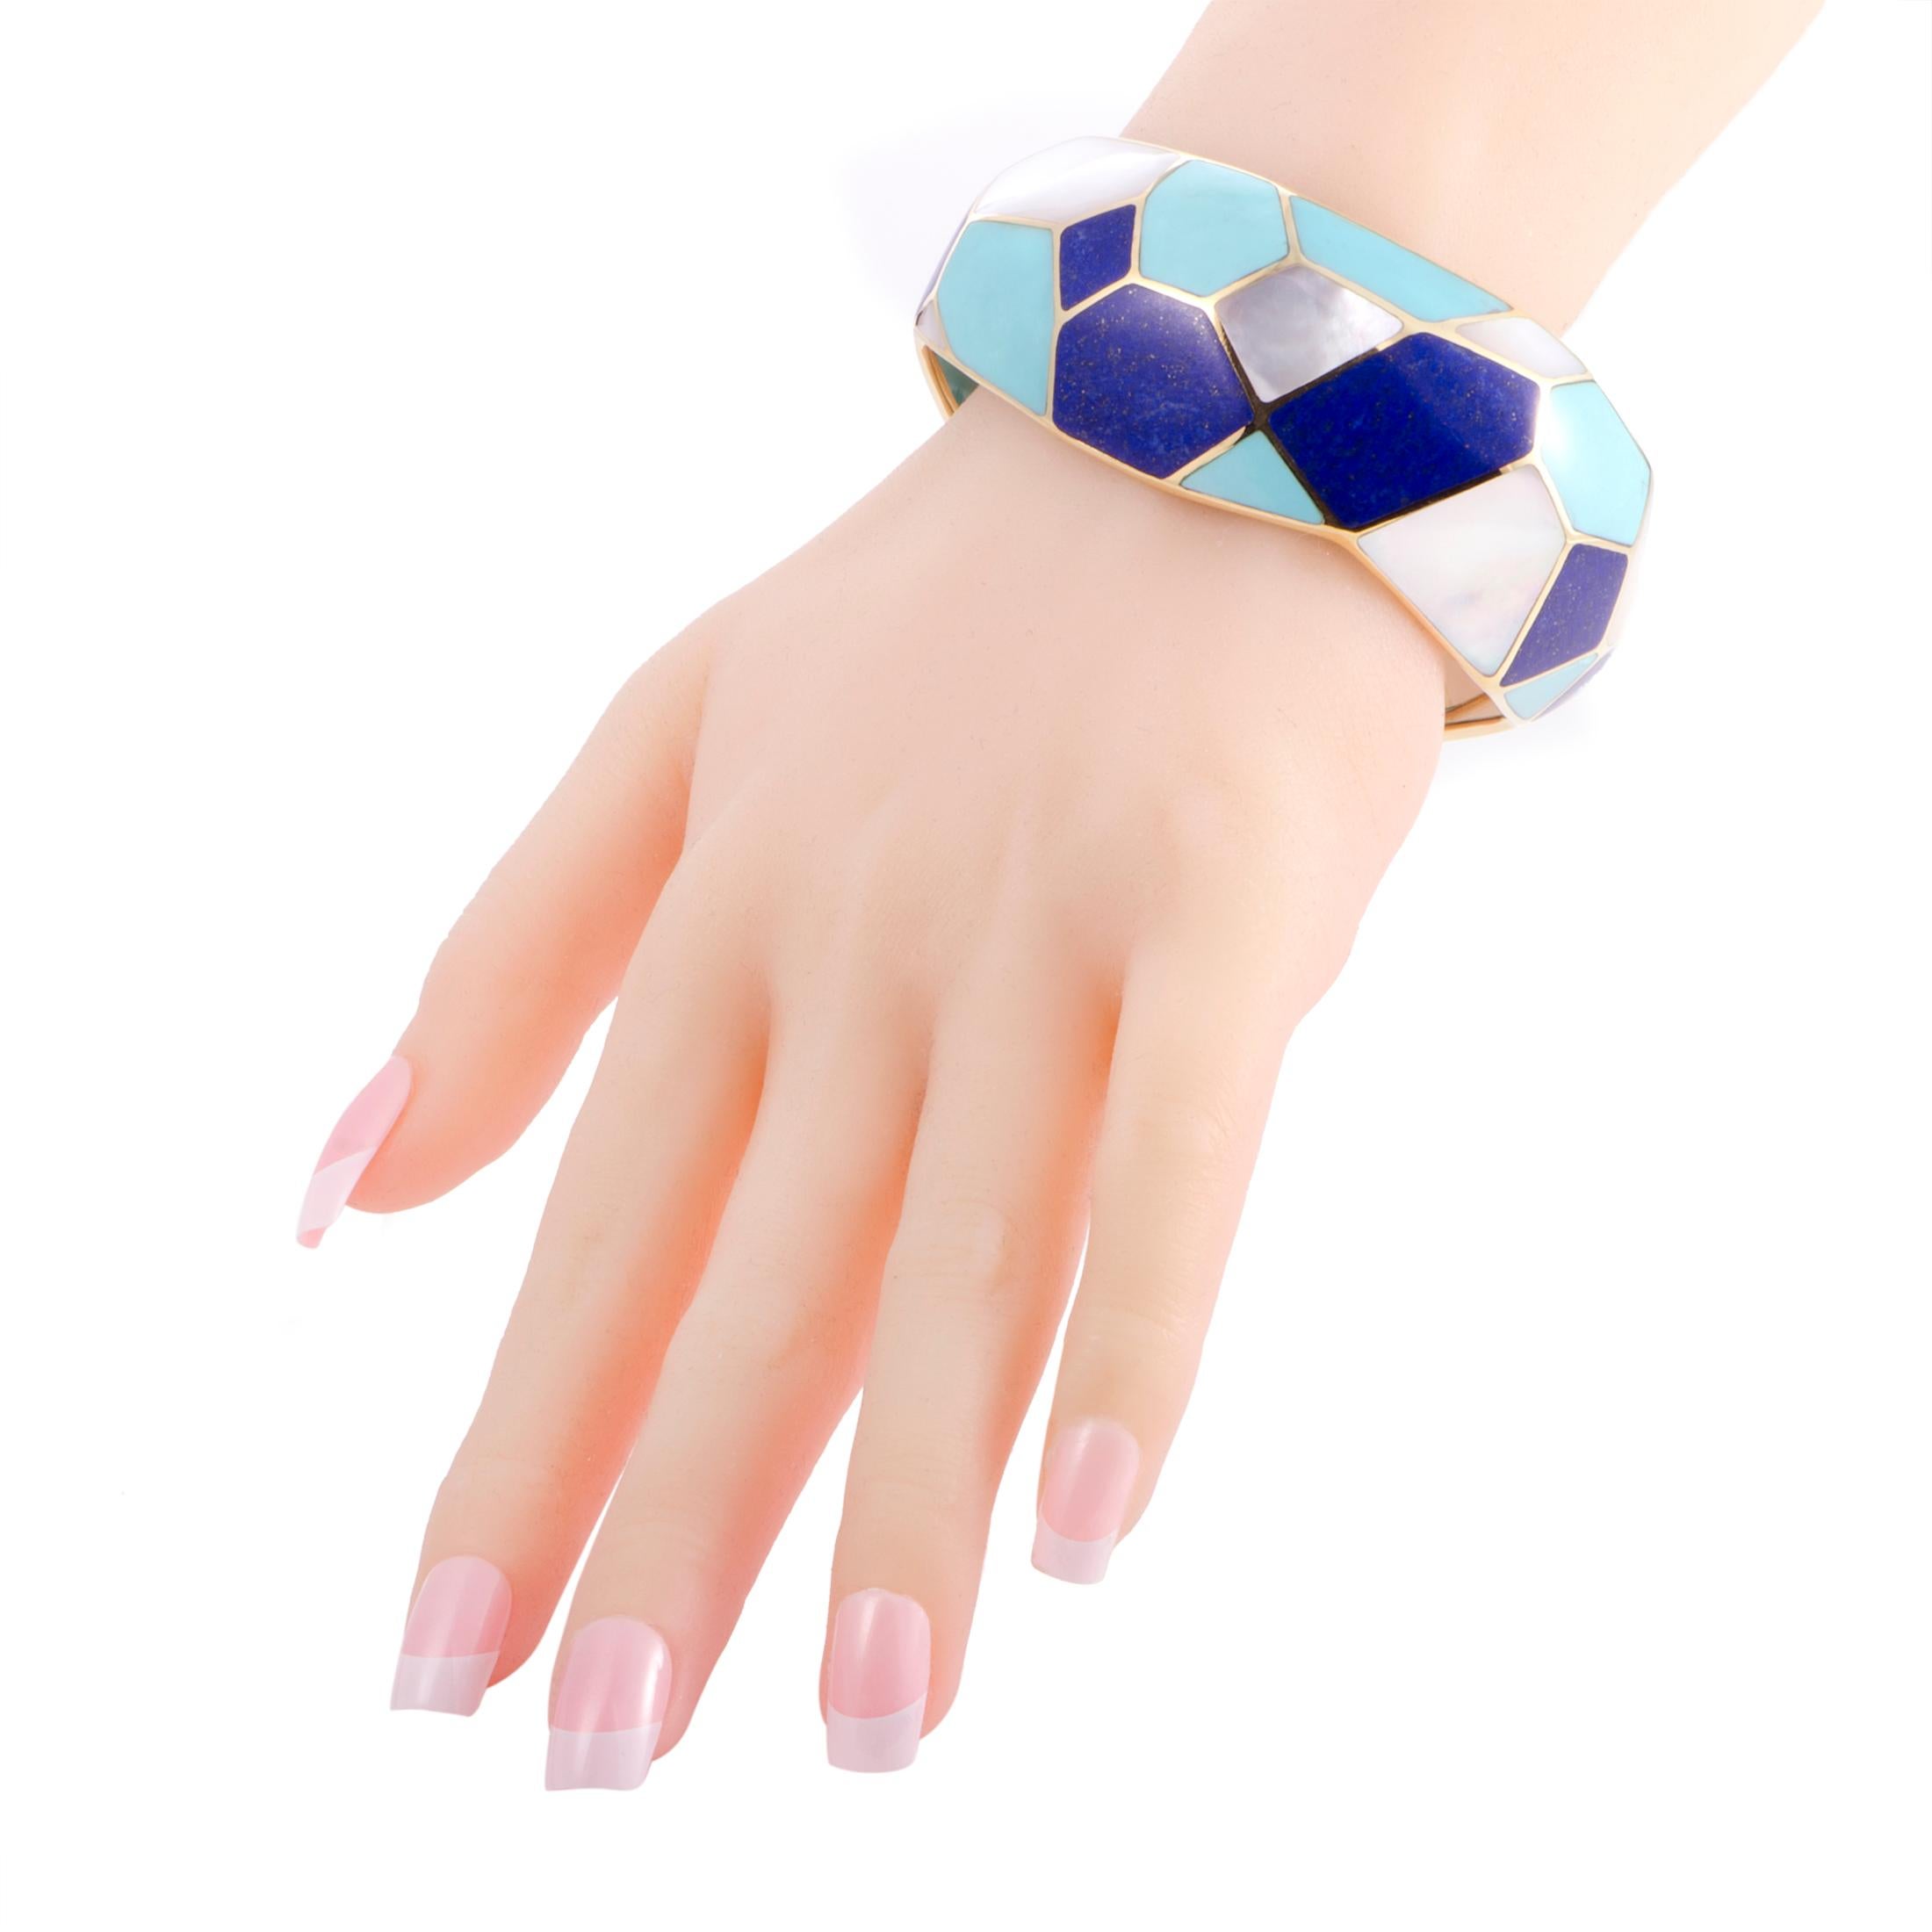 The harmonious sight of splendid lapis lazuli and turquoise stones is joined by the exceptionally feminine mother of pearl in this statement piece from Ippolita. Designed for the attractive “Rock Candy” collection, the bangle is made of